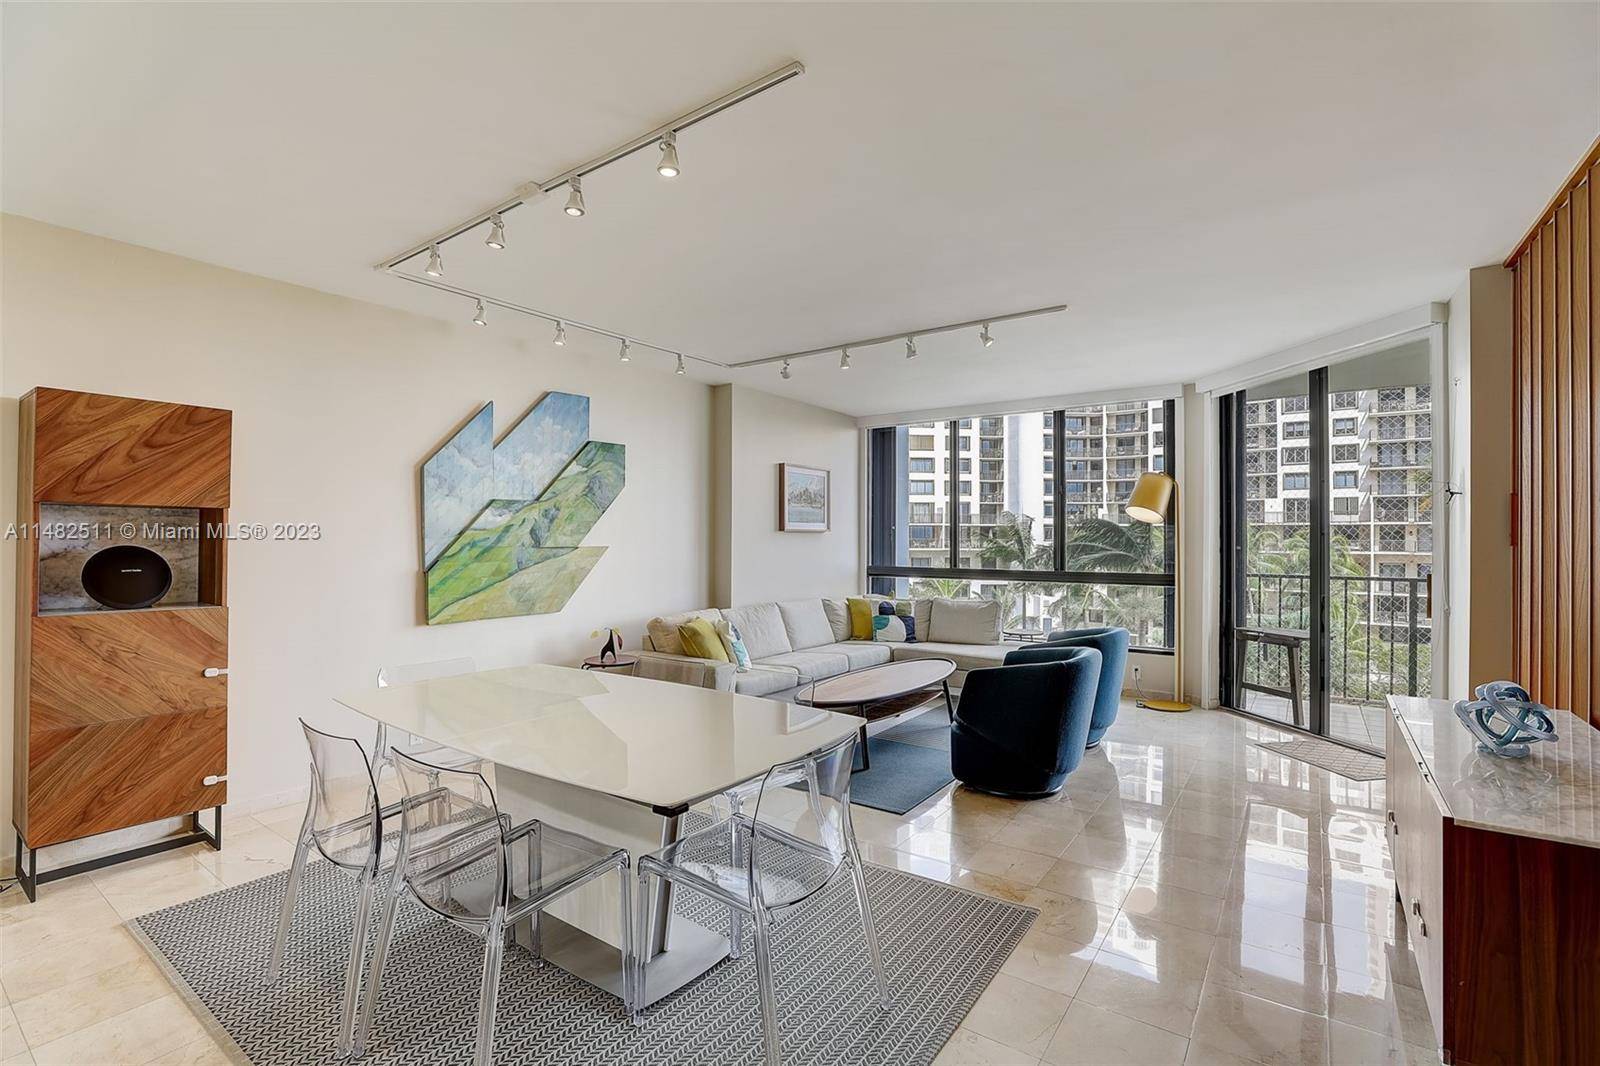 The ONLY AVAILABLE bright and modern 3 bedroom 3 bath unit with 3 parking spaces in Brickell Key.